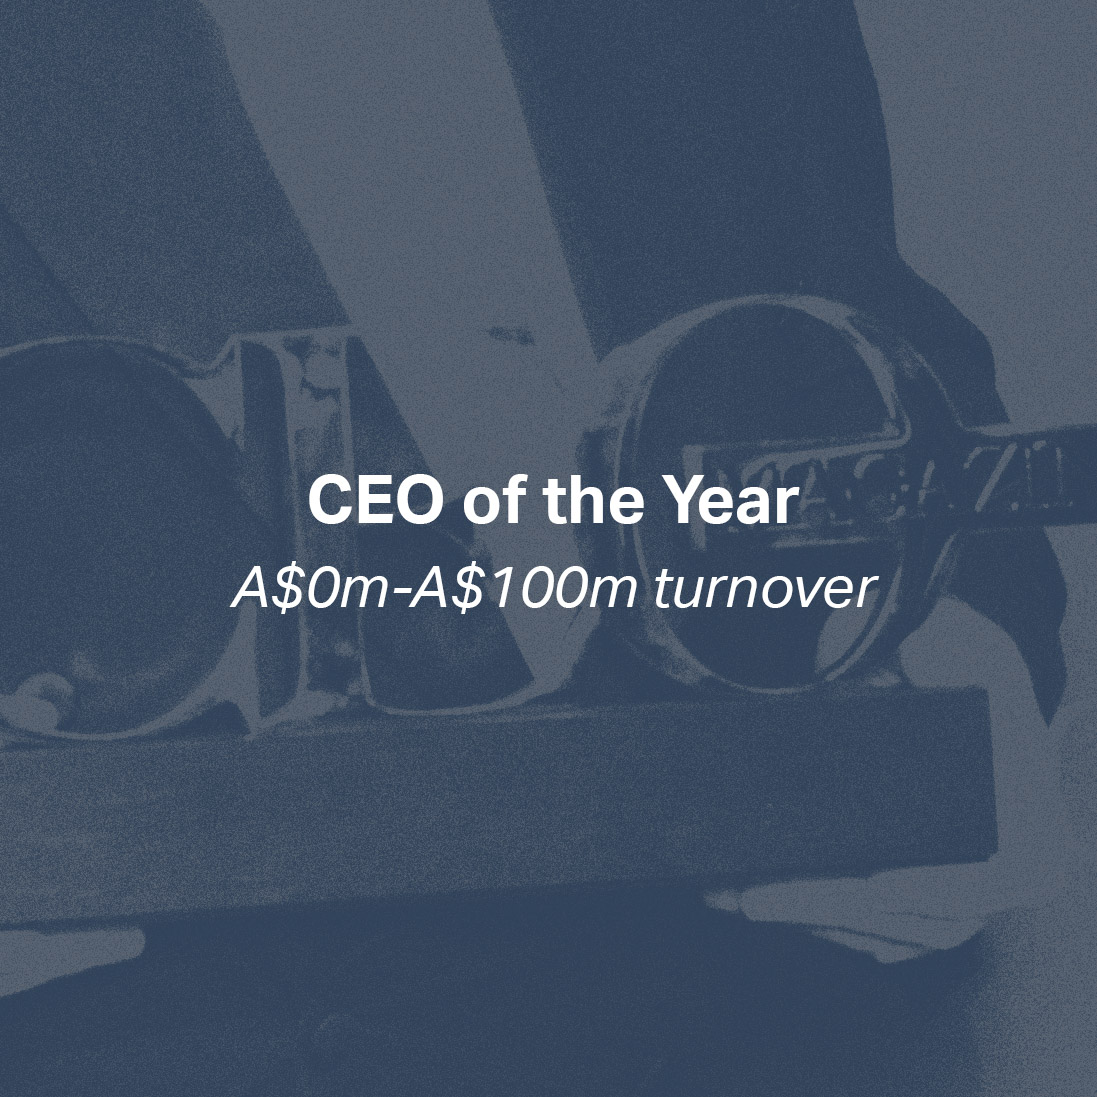 CEO of the Year - A$0m-A$100m turnover